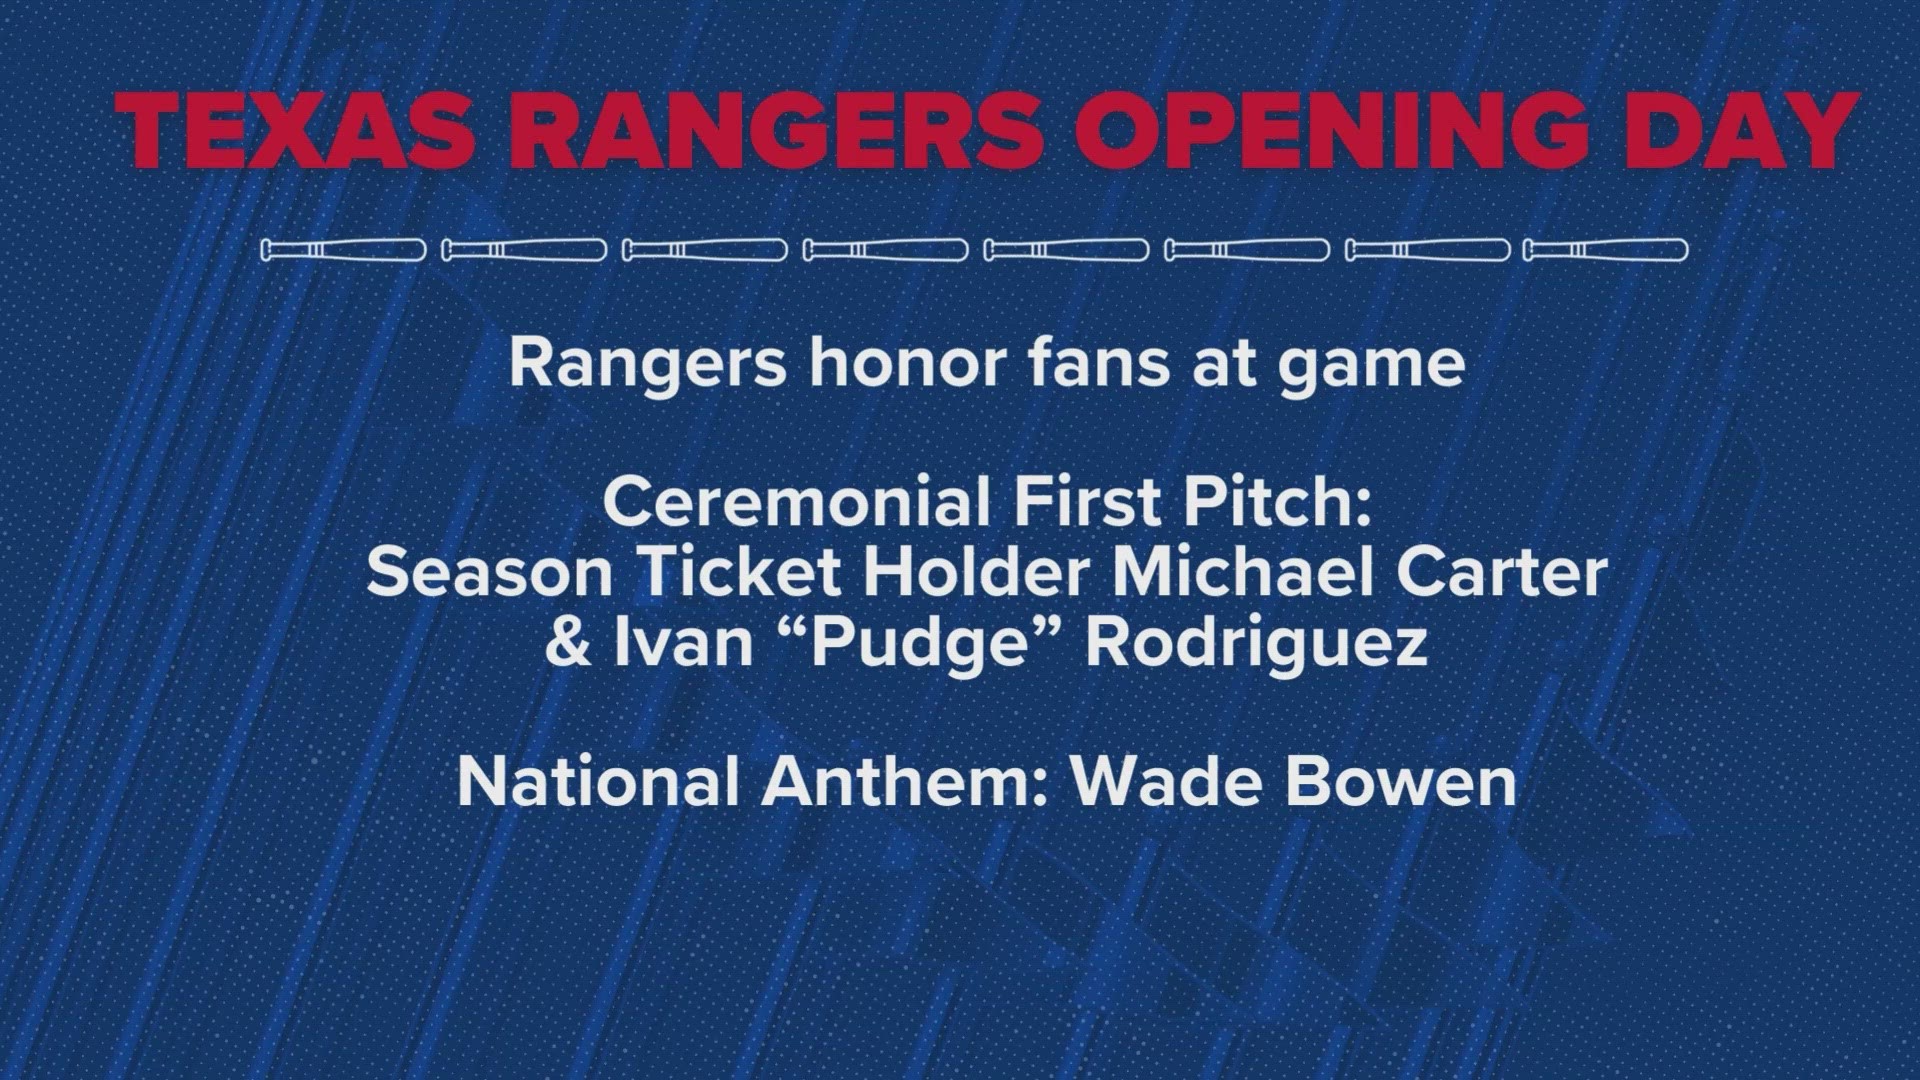 The first national anthem singer for the Texas Rangers season is a Waco native country singer/songwriter who released his first album in 2002.